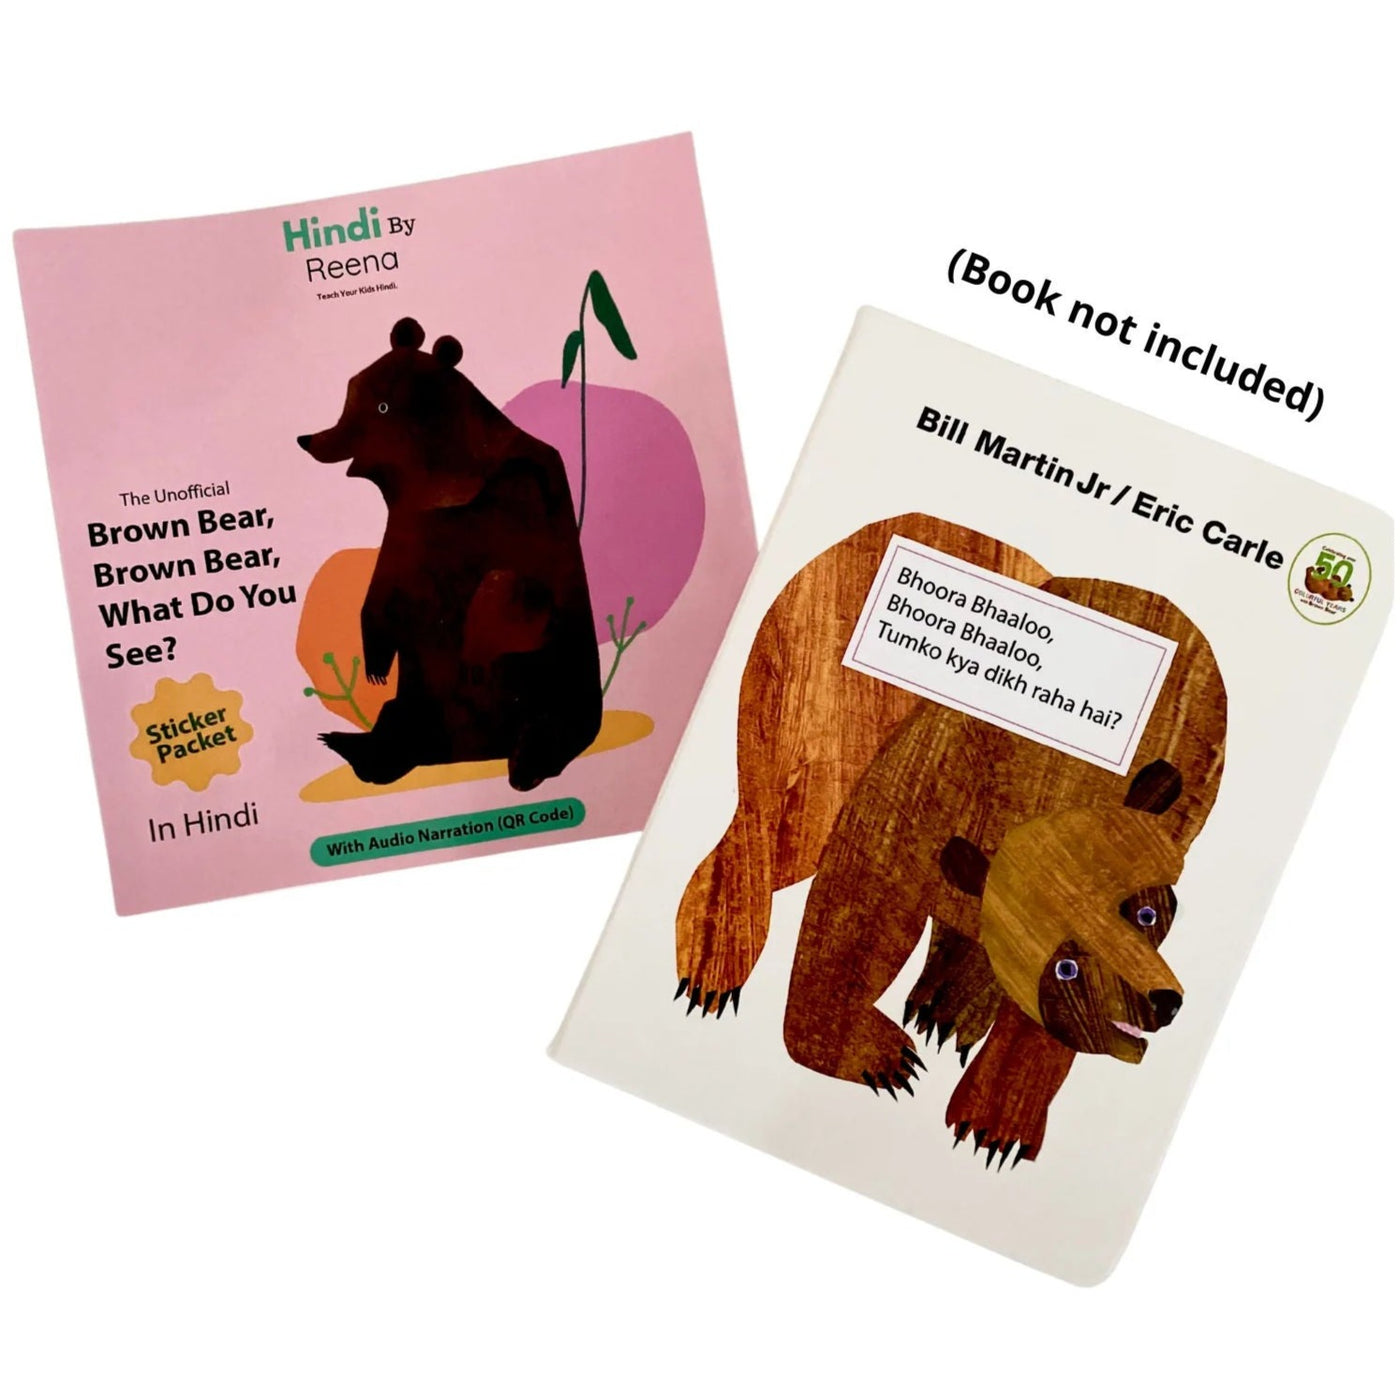 Brown Bear Sticker pack by Hindi By Reena